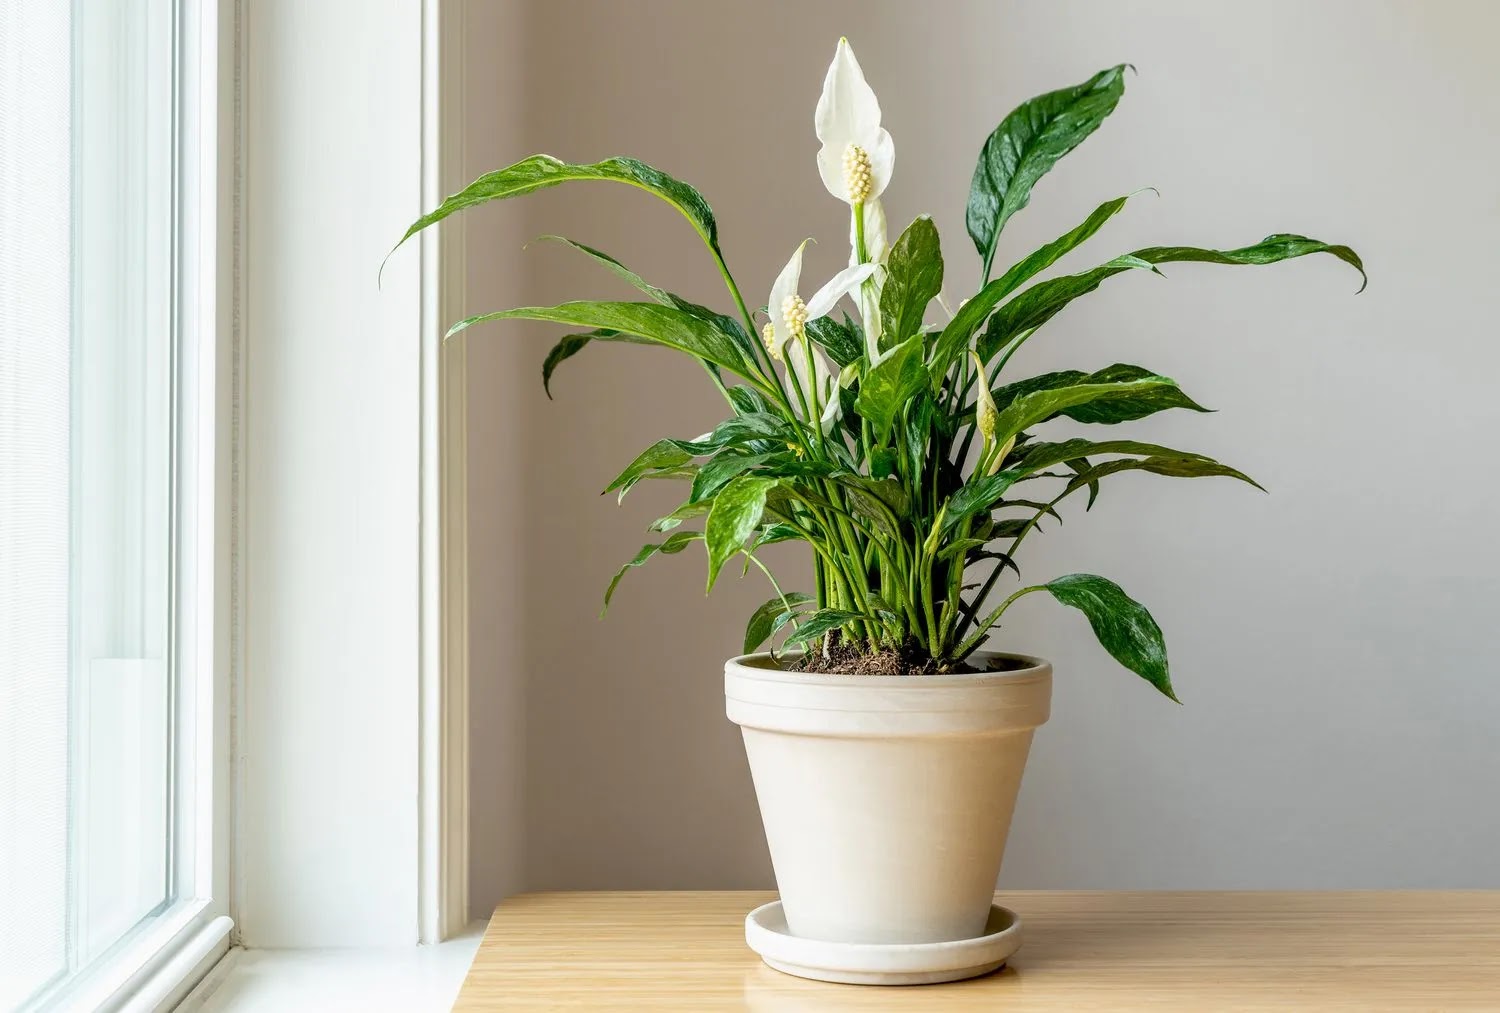 DIY Air Purifying Plant Projects